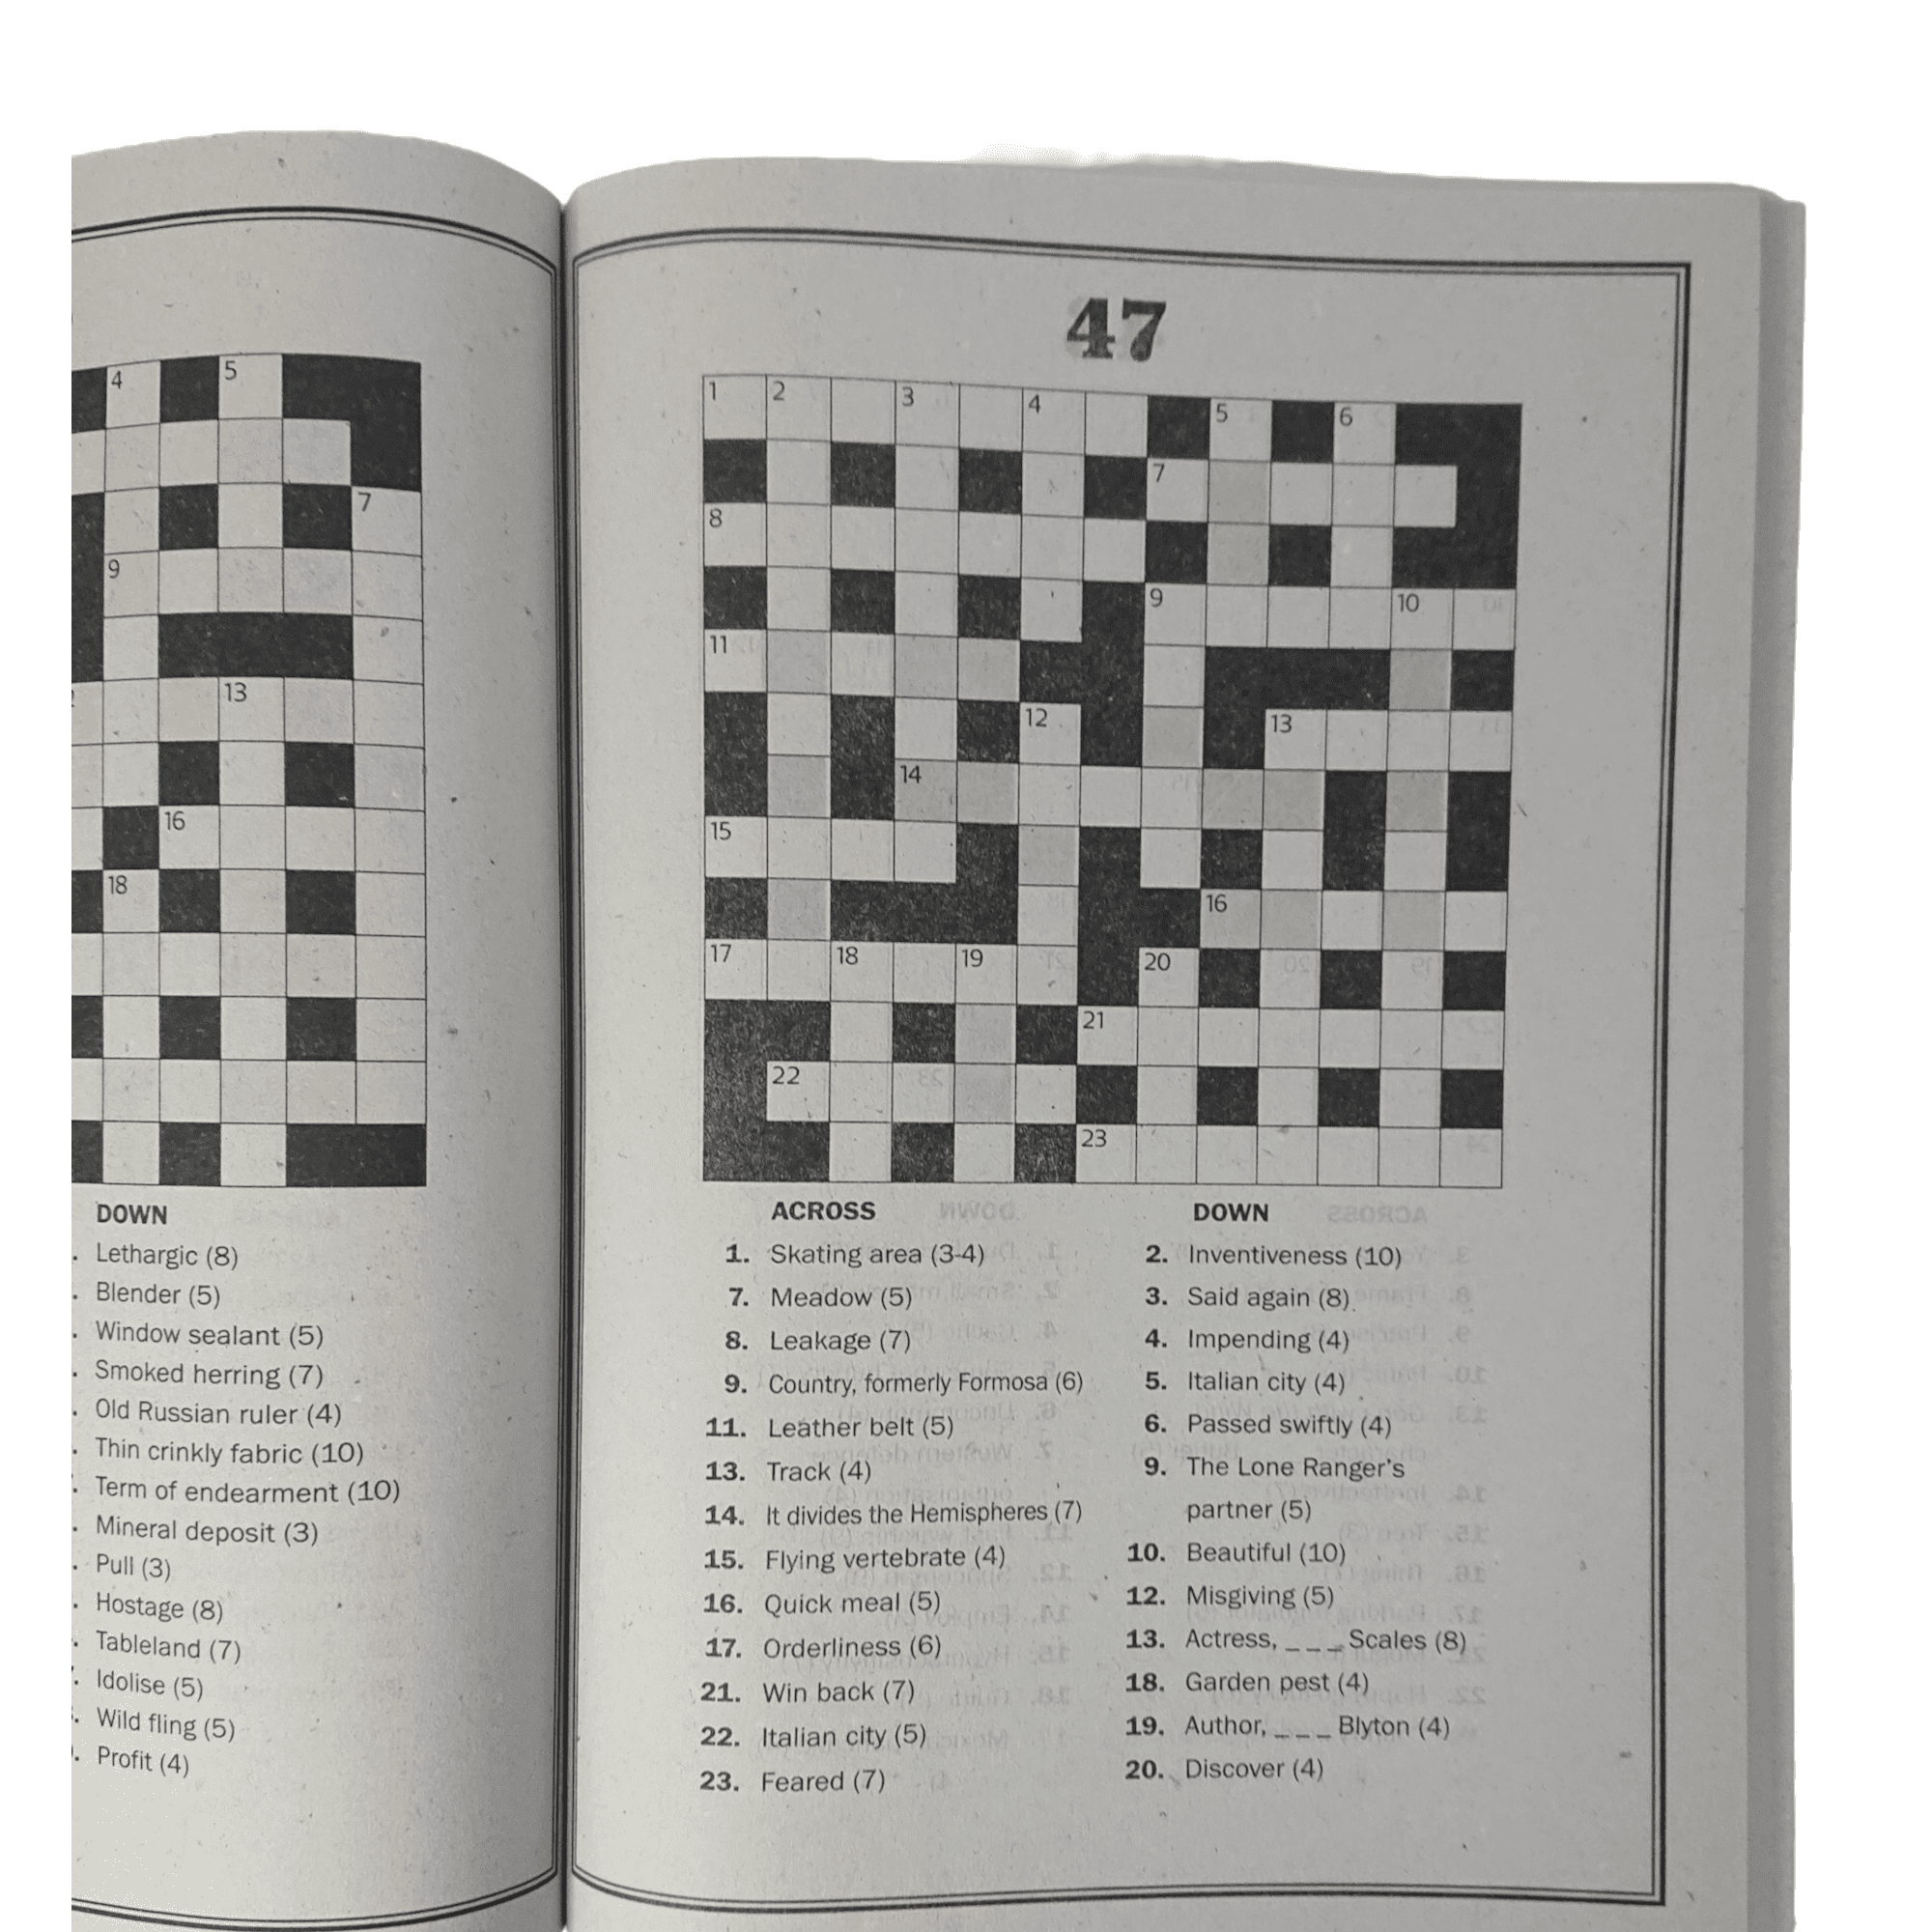 an example of one of the large print or large writing crossword puzzles